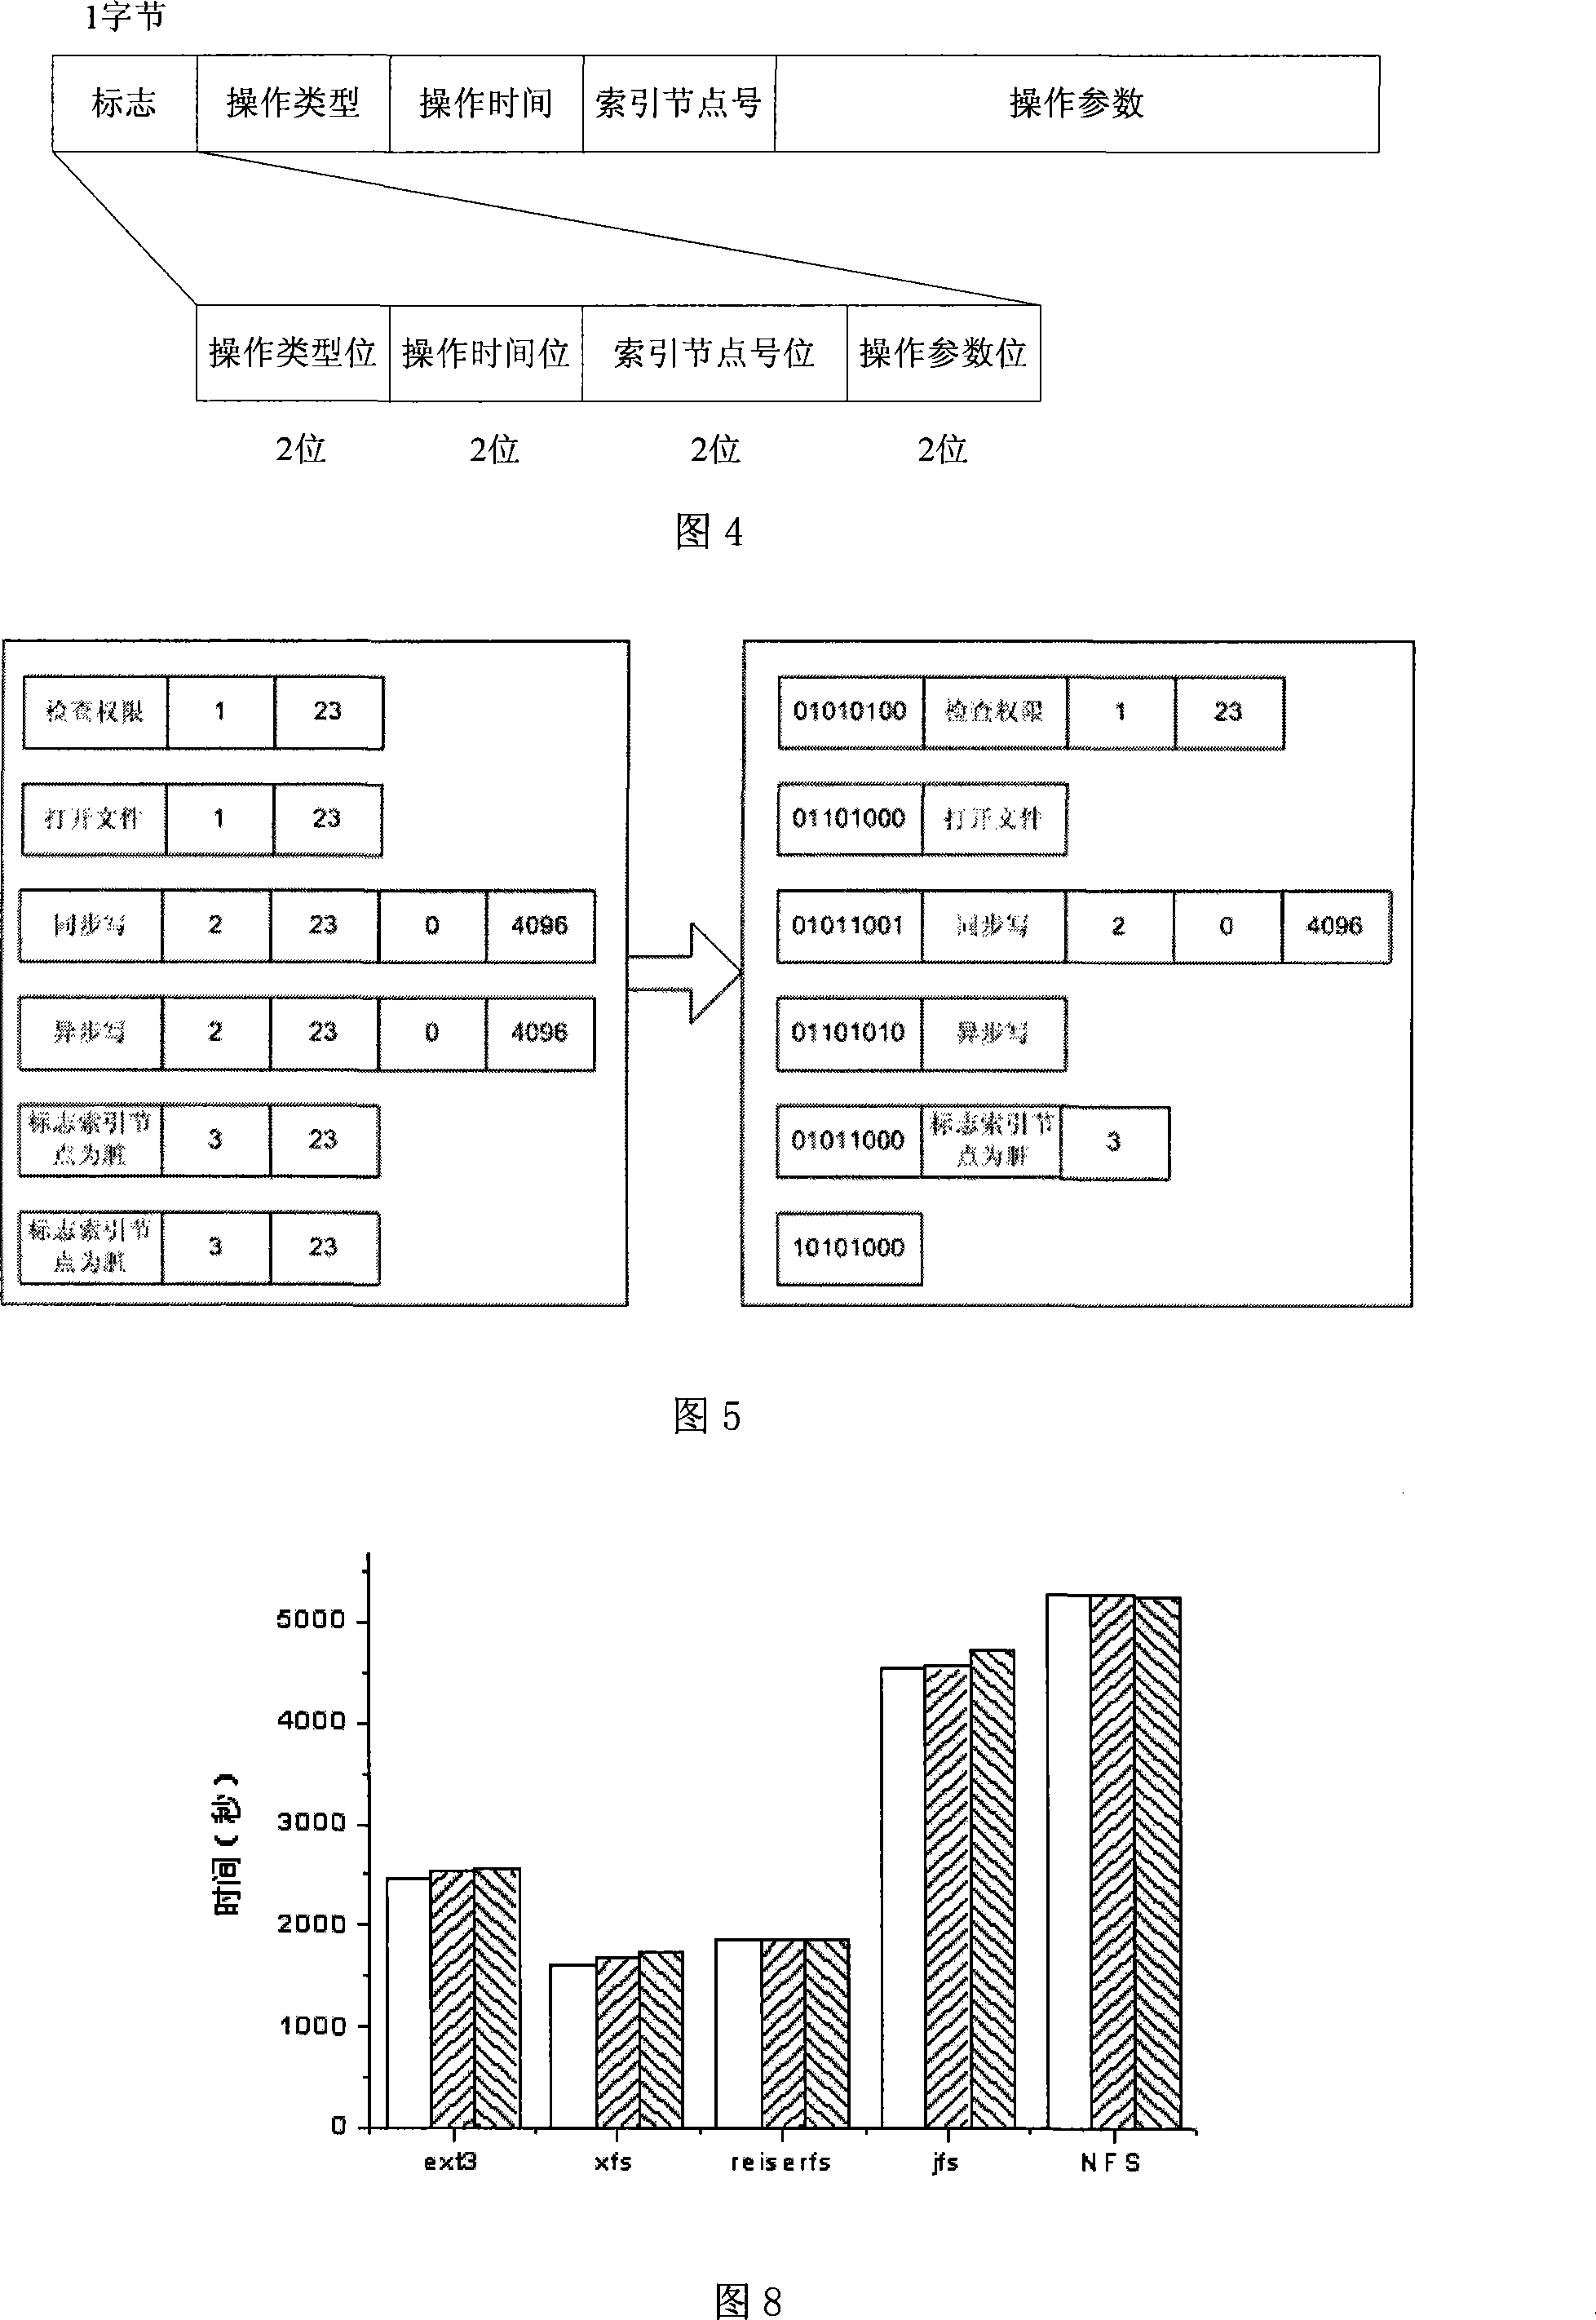 File systems accessing register dynamic collection method